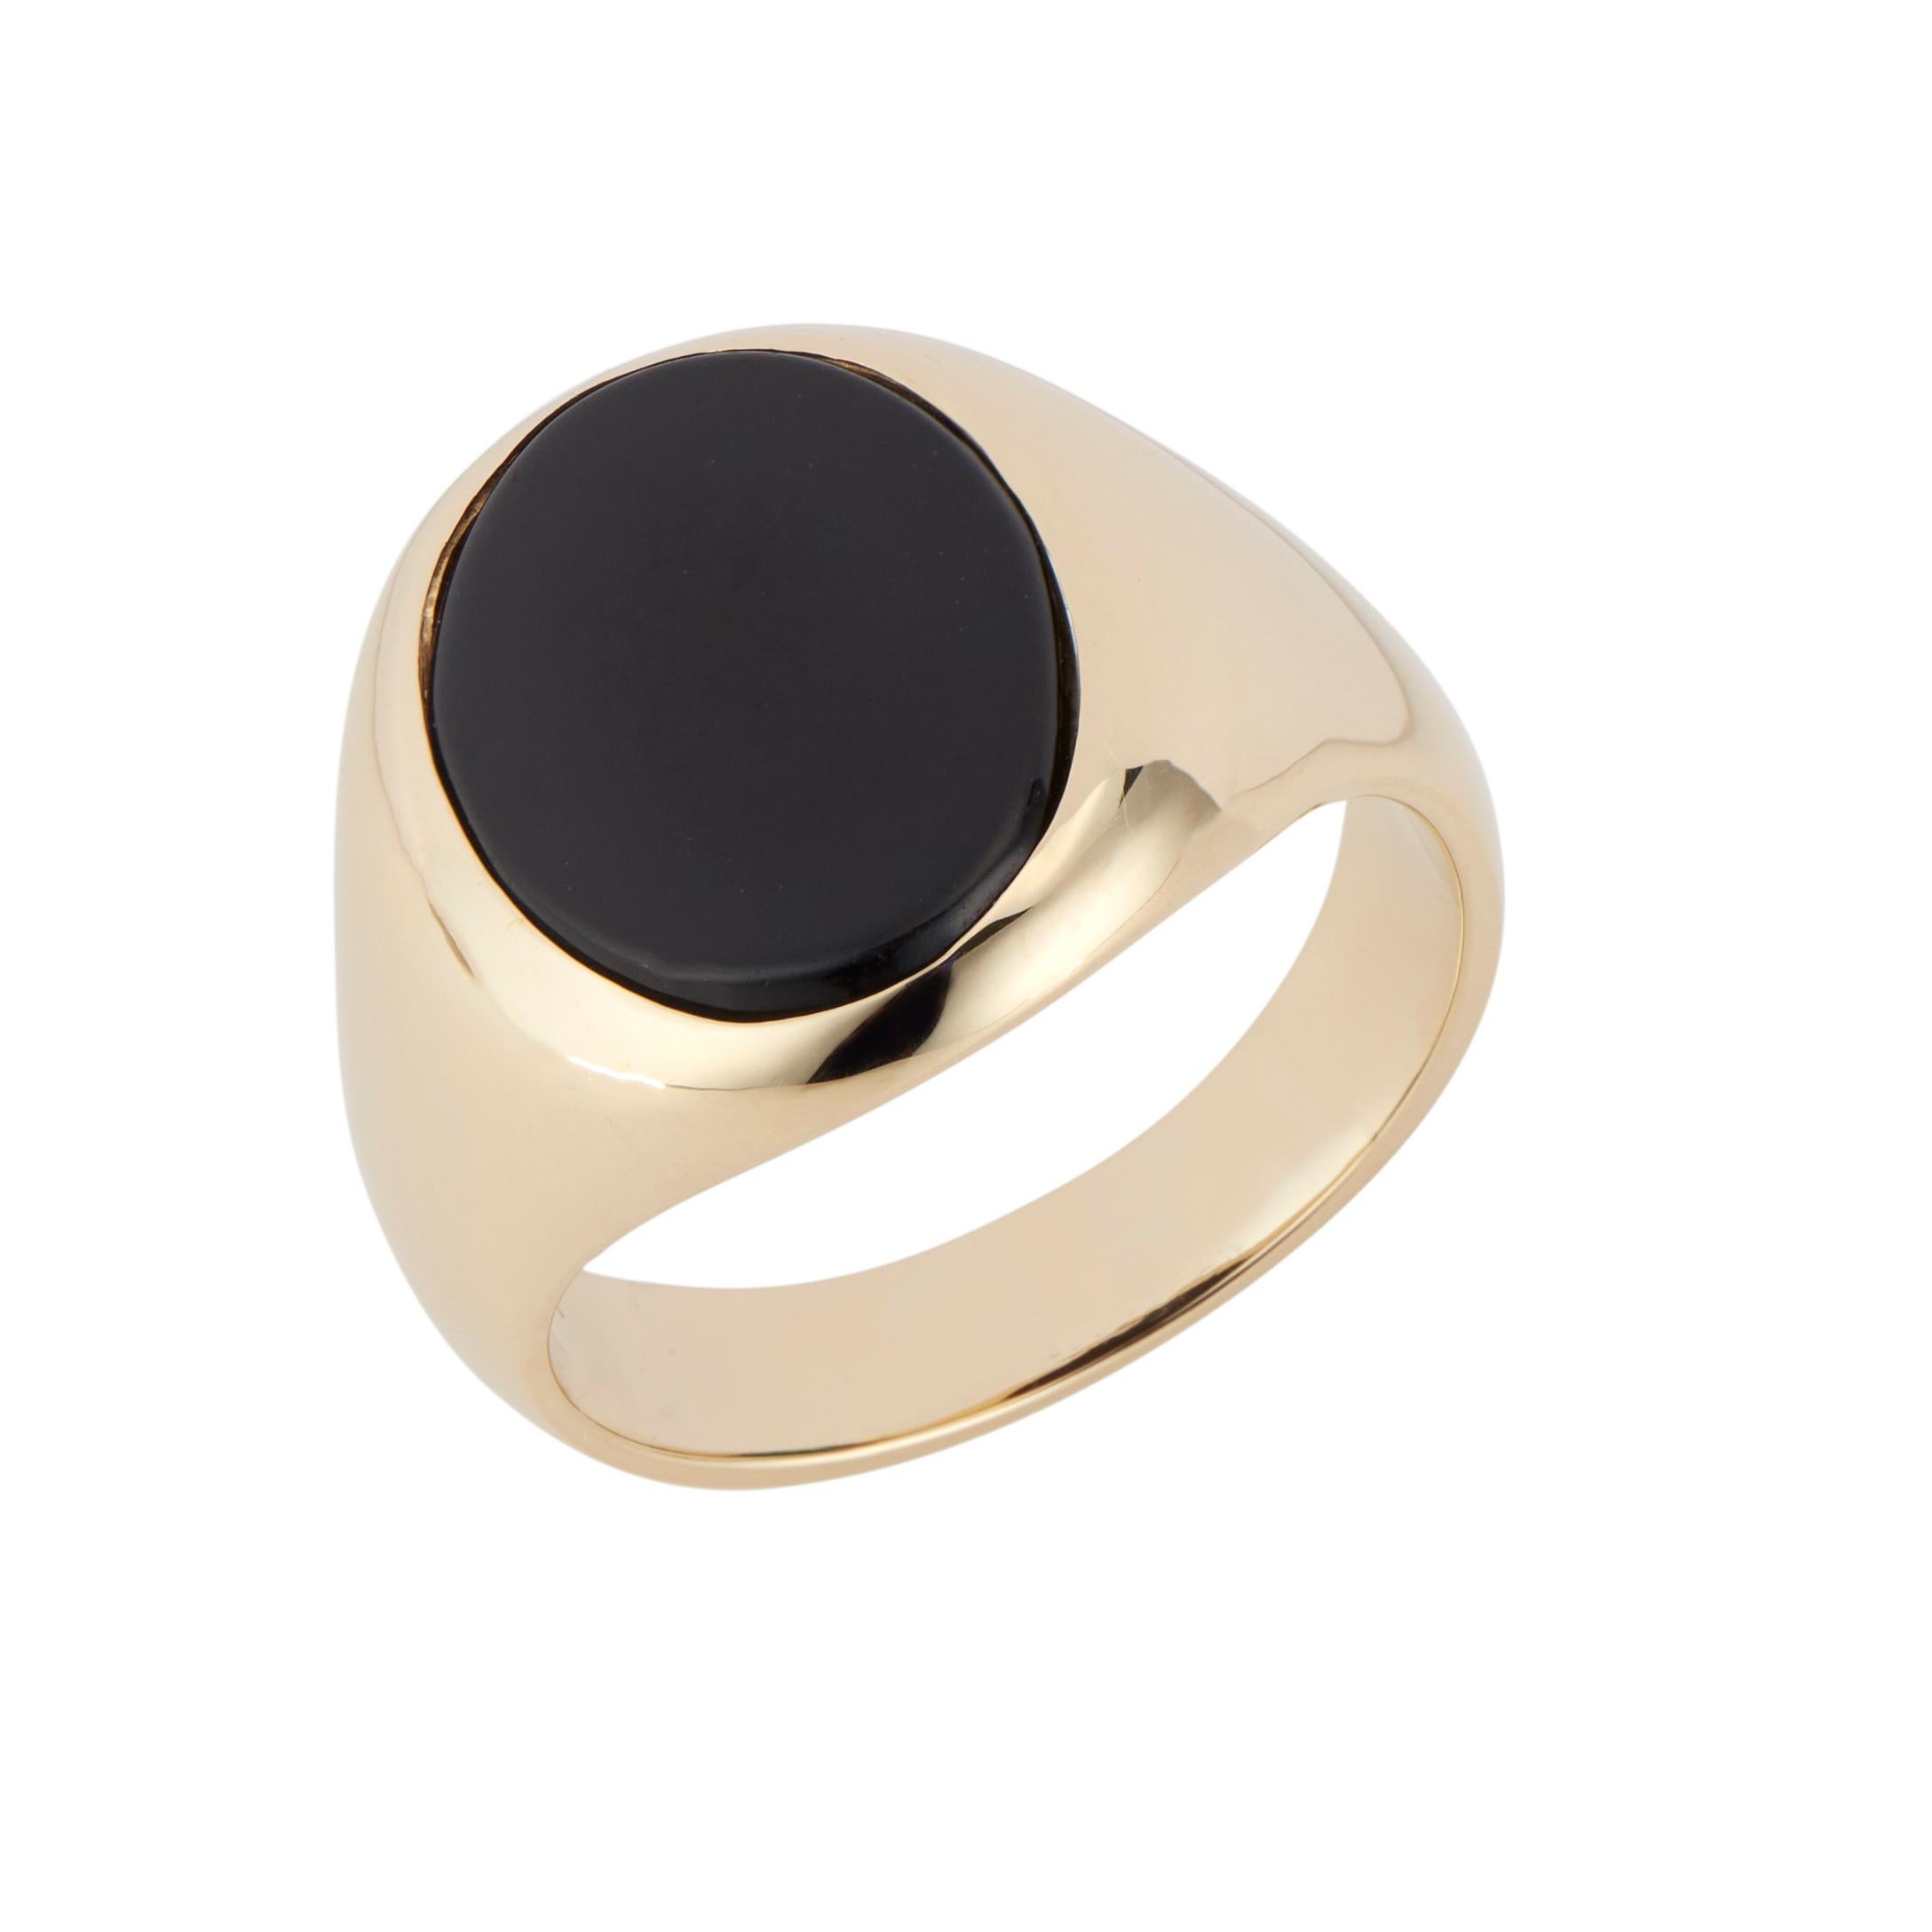 1960's Mid-Century Gold signet ring. Oval shaped black onyx die struck in solid 14k gold setting made by Larter & Sons for Tiffany & Co 

1 oval onyx black tablet, 15.6mm – 11.6mm
Size 8.5 and sizable
14k yellow gold 
Stamped: 14k
Hallmark: Tiffany